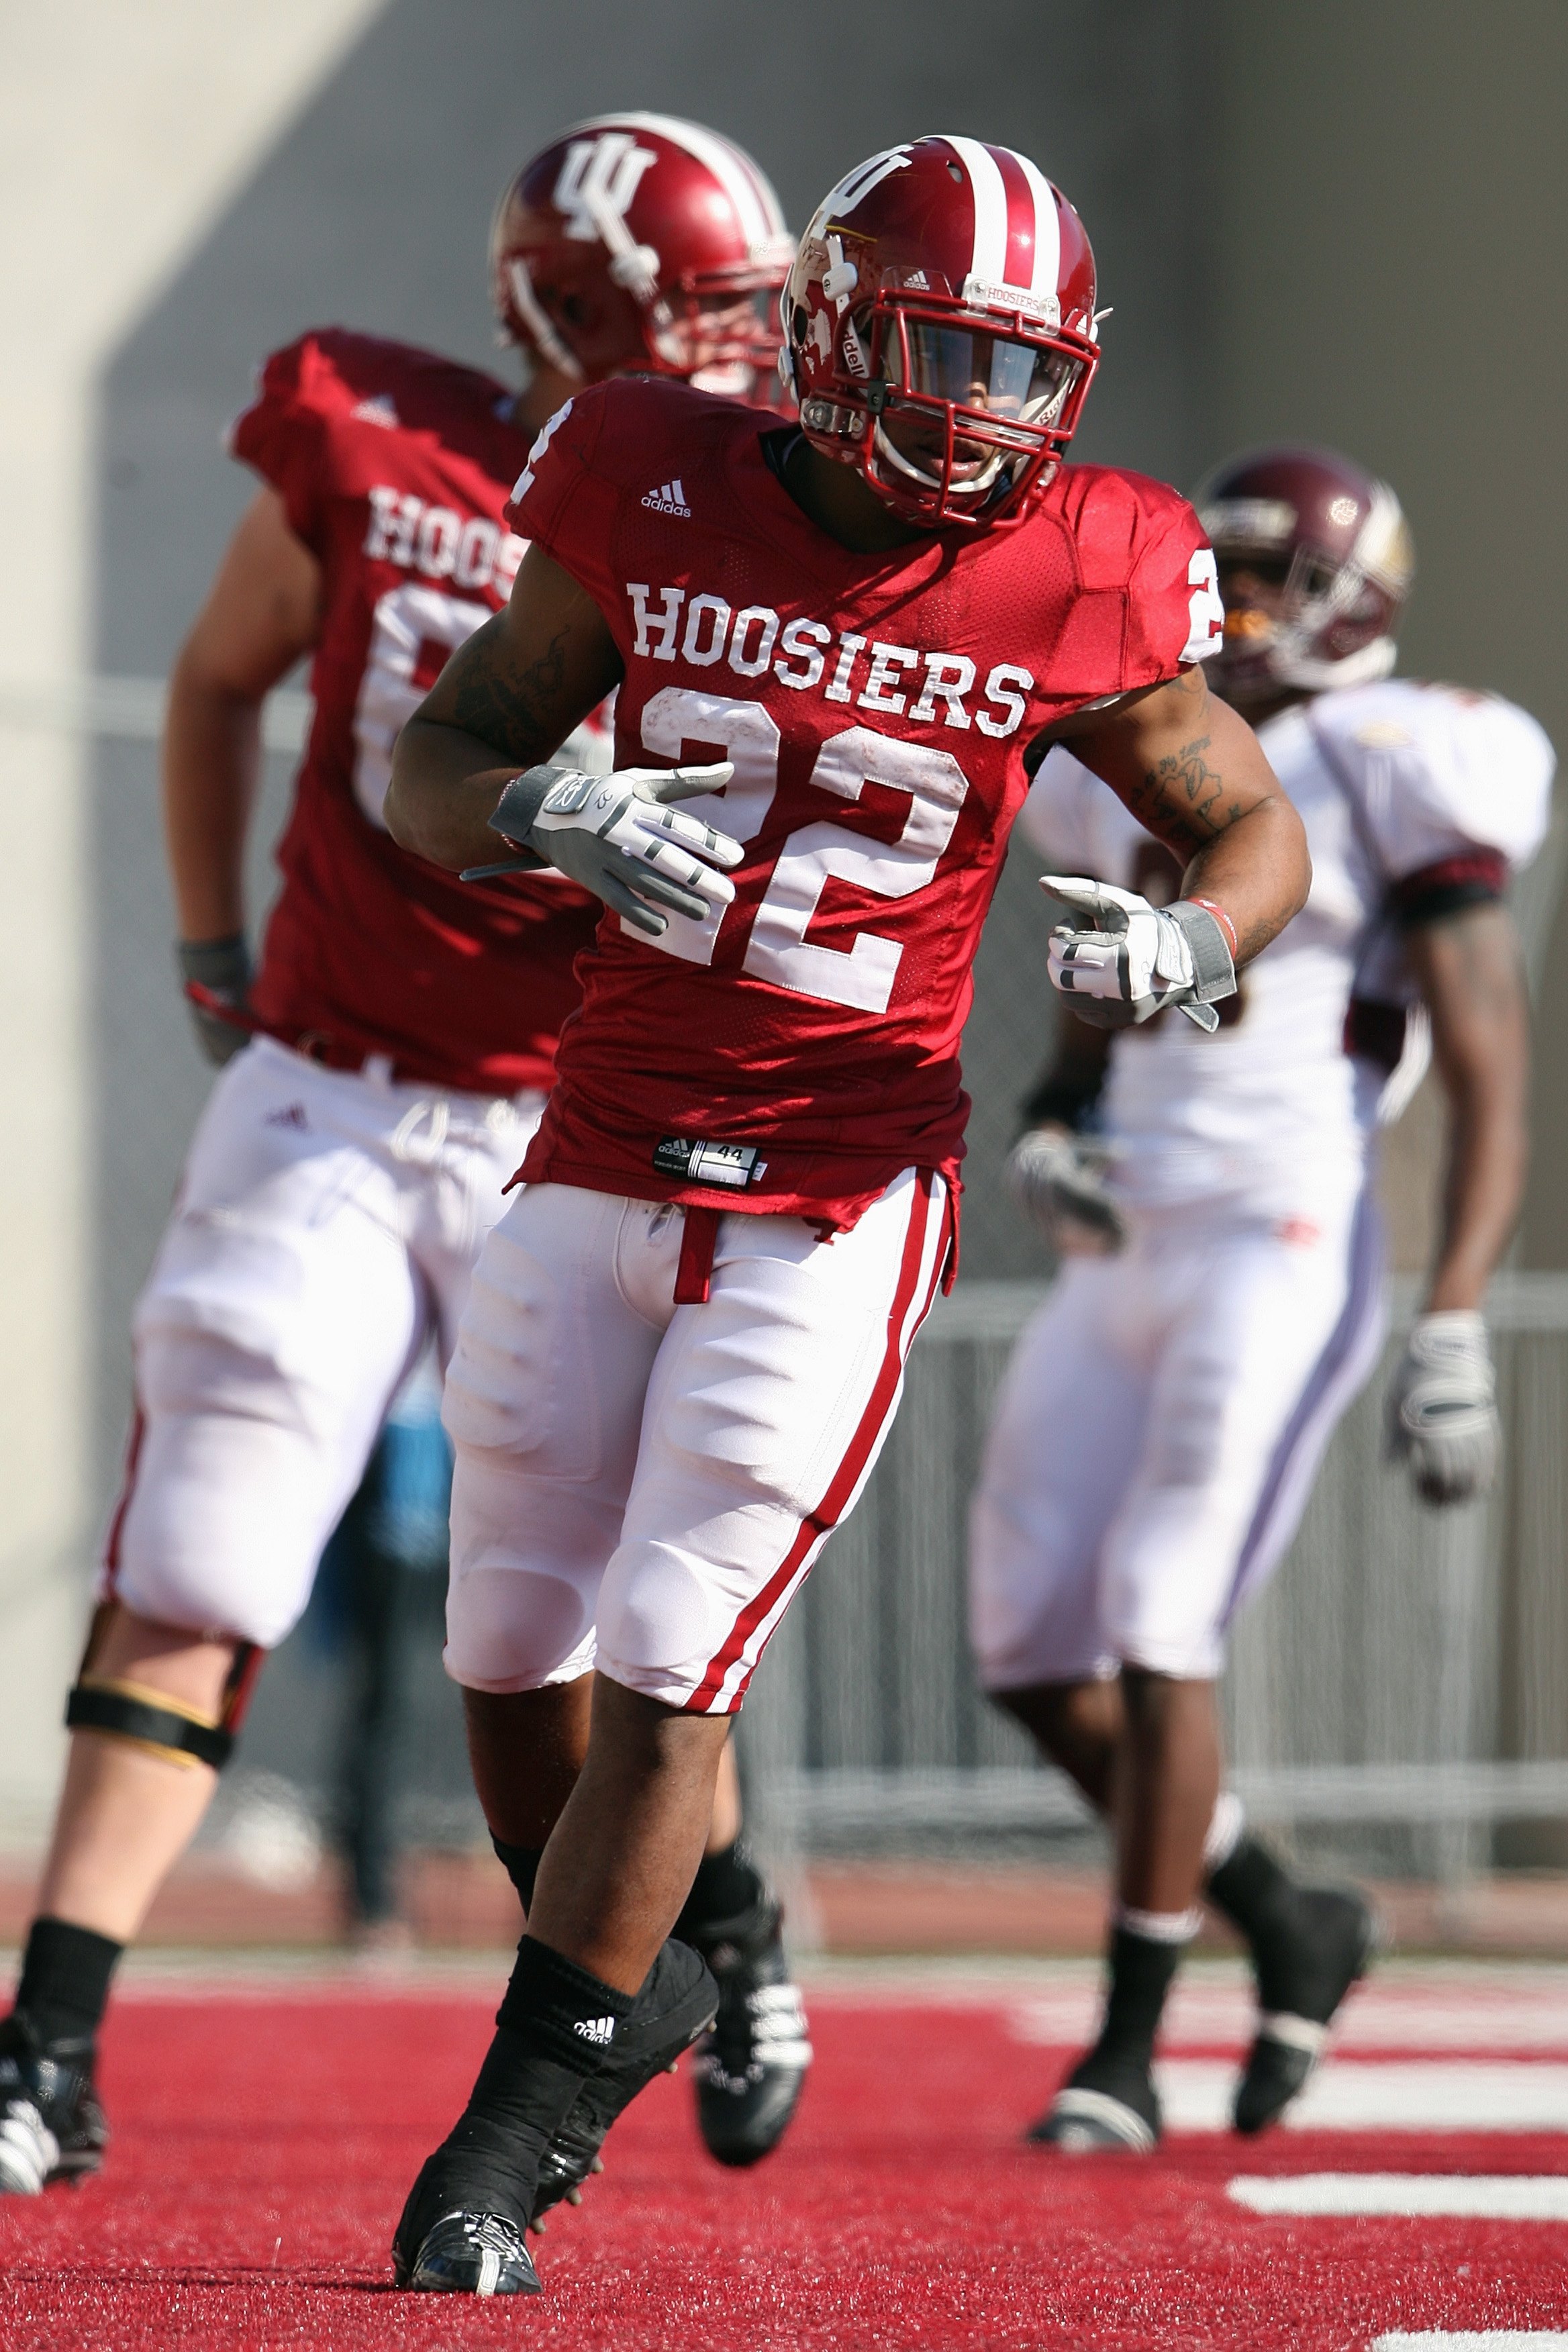 Indiana football: Why the new uniforms Look Like That - The